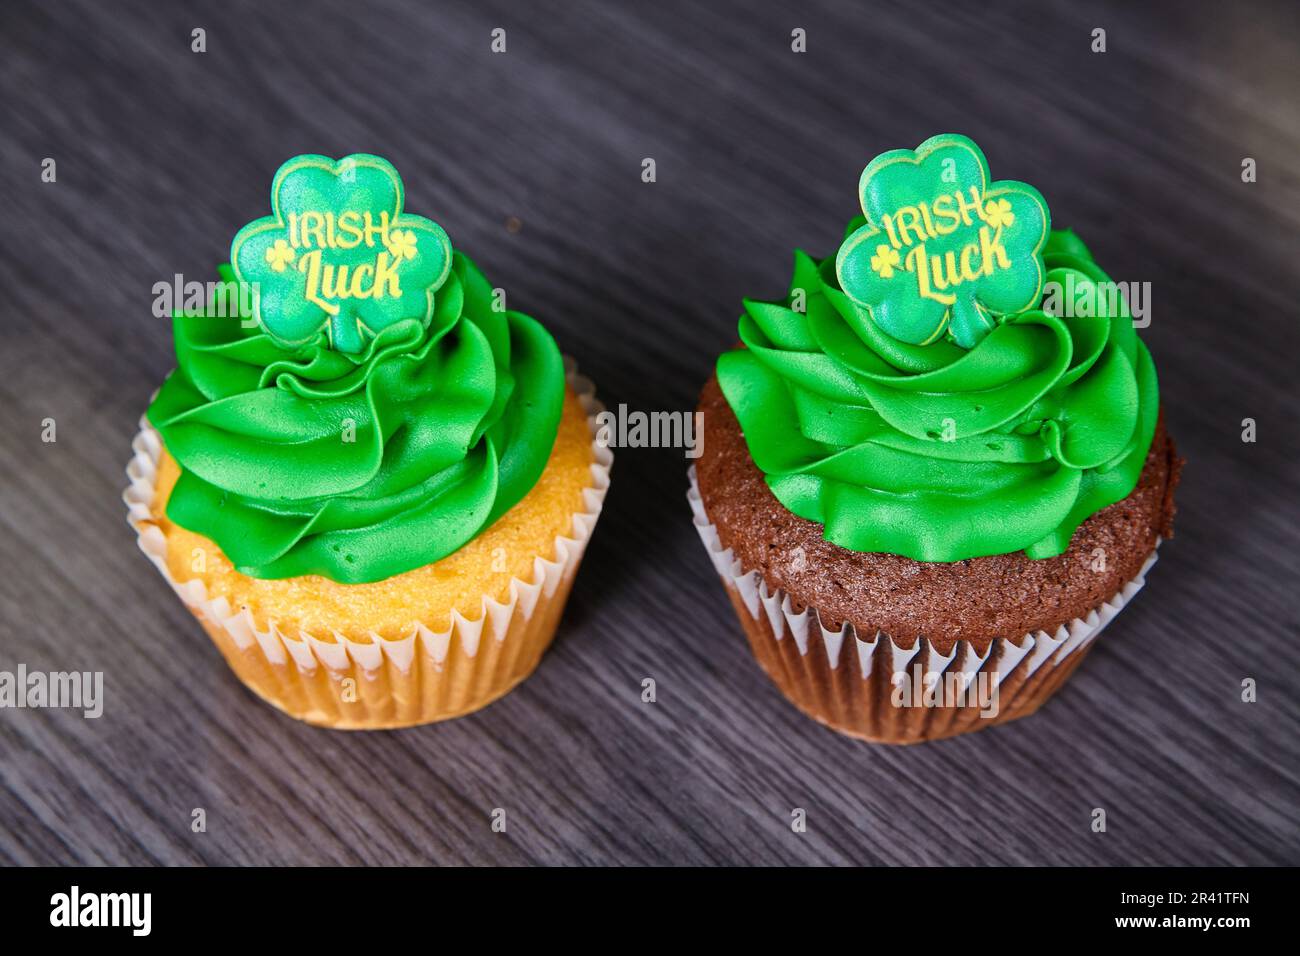 Vanilla and chocolate St. Patrick’s Day cupcakes green frosting Irish Luck four-leaf clover topper Stock Photo